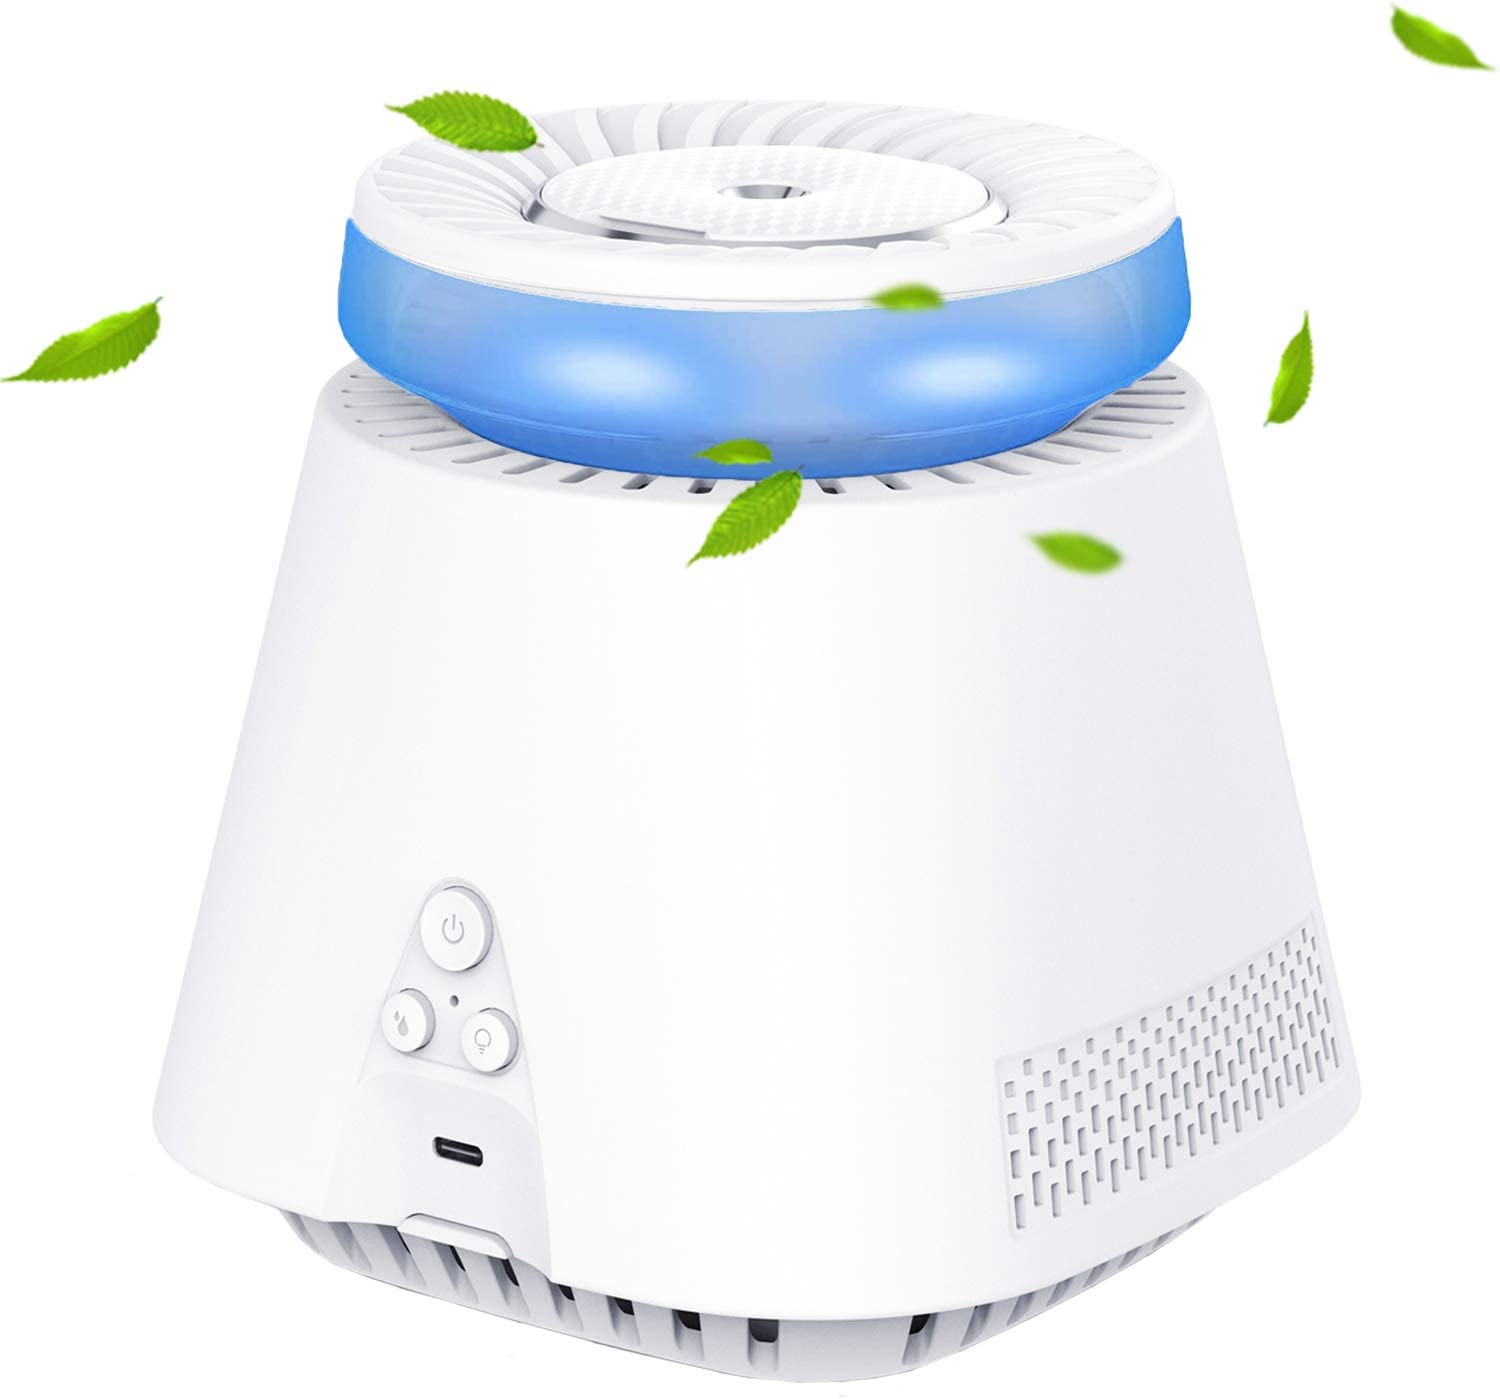 Thsinde Air Purifier, Home Air Purifiers Cool Mist Humidifiers 2-in-1 for Bedroom, Small Room and Office Whisper Quiet